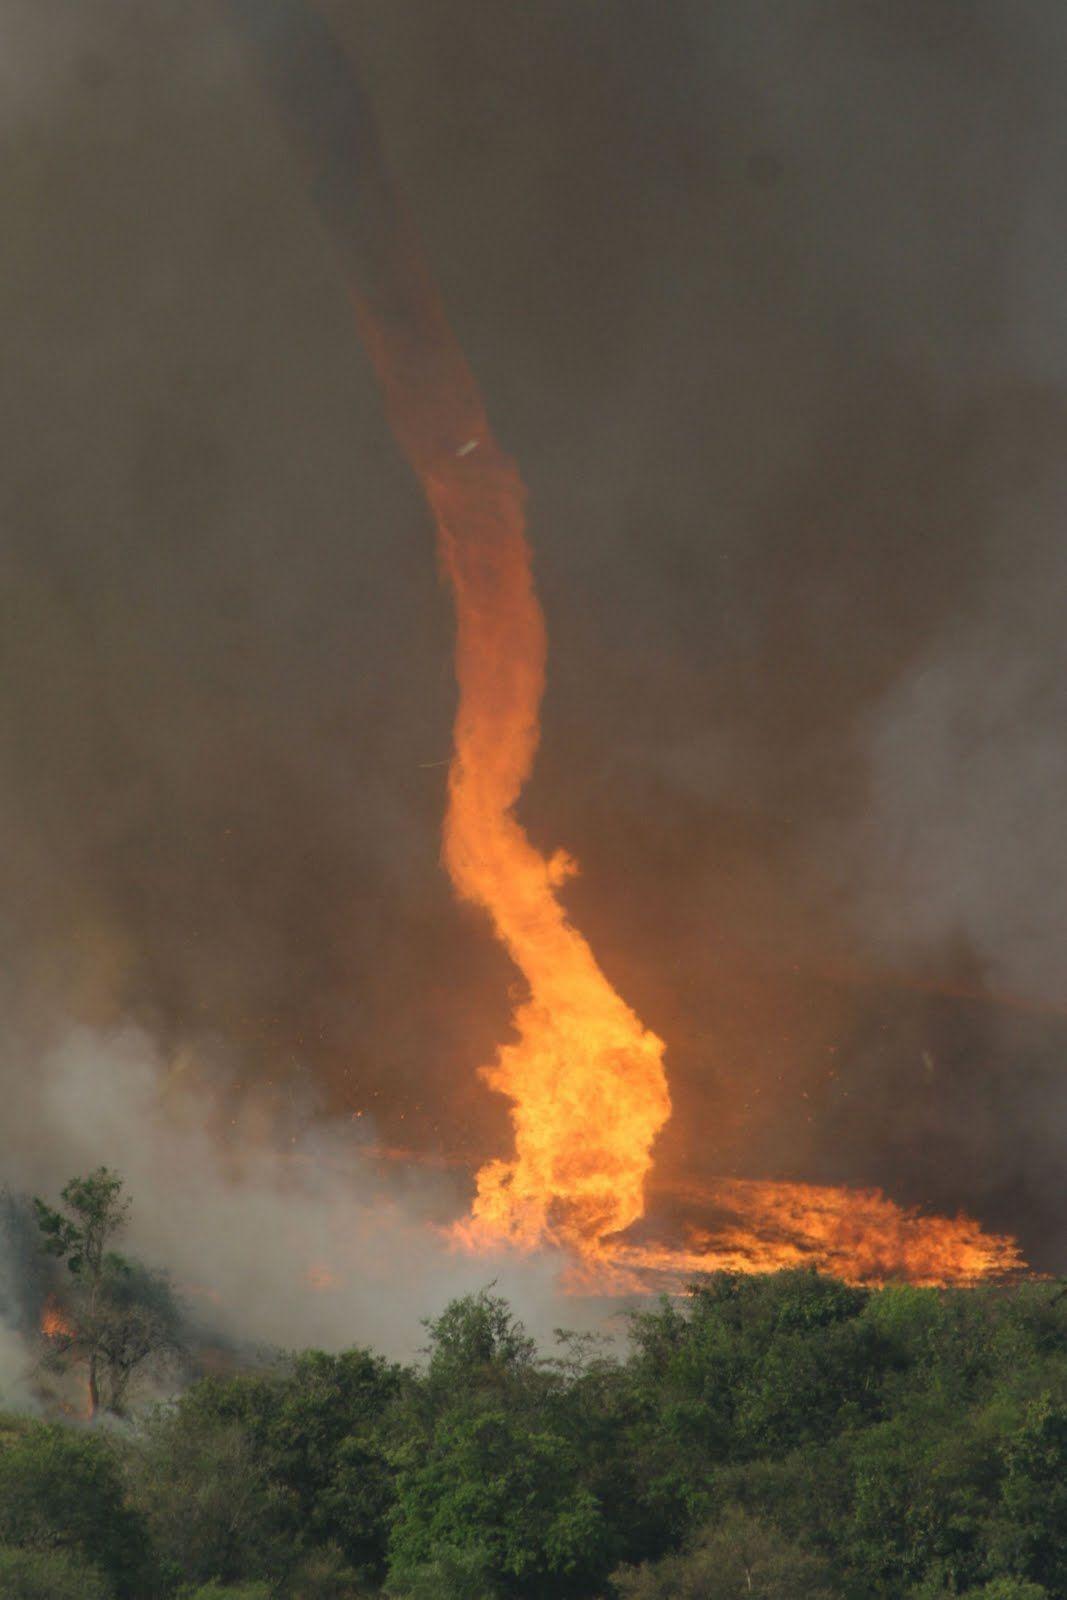 Extremely rare shot of a fire whirl by Photojournalist Edio Junior